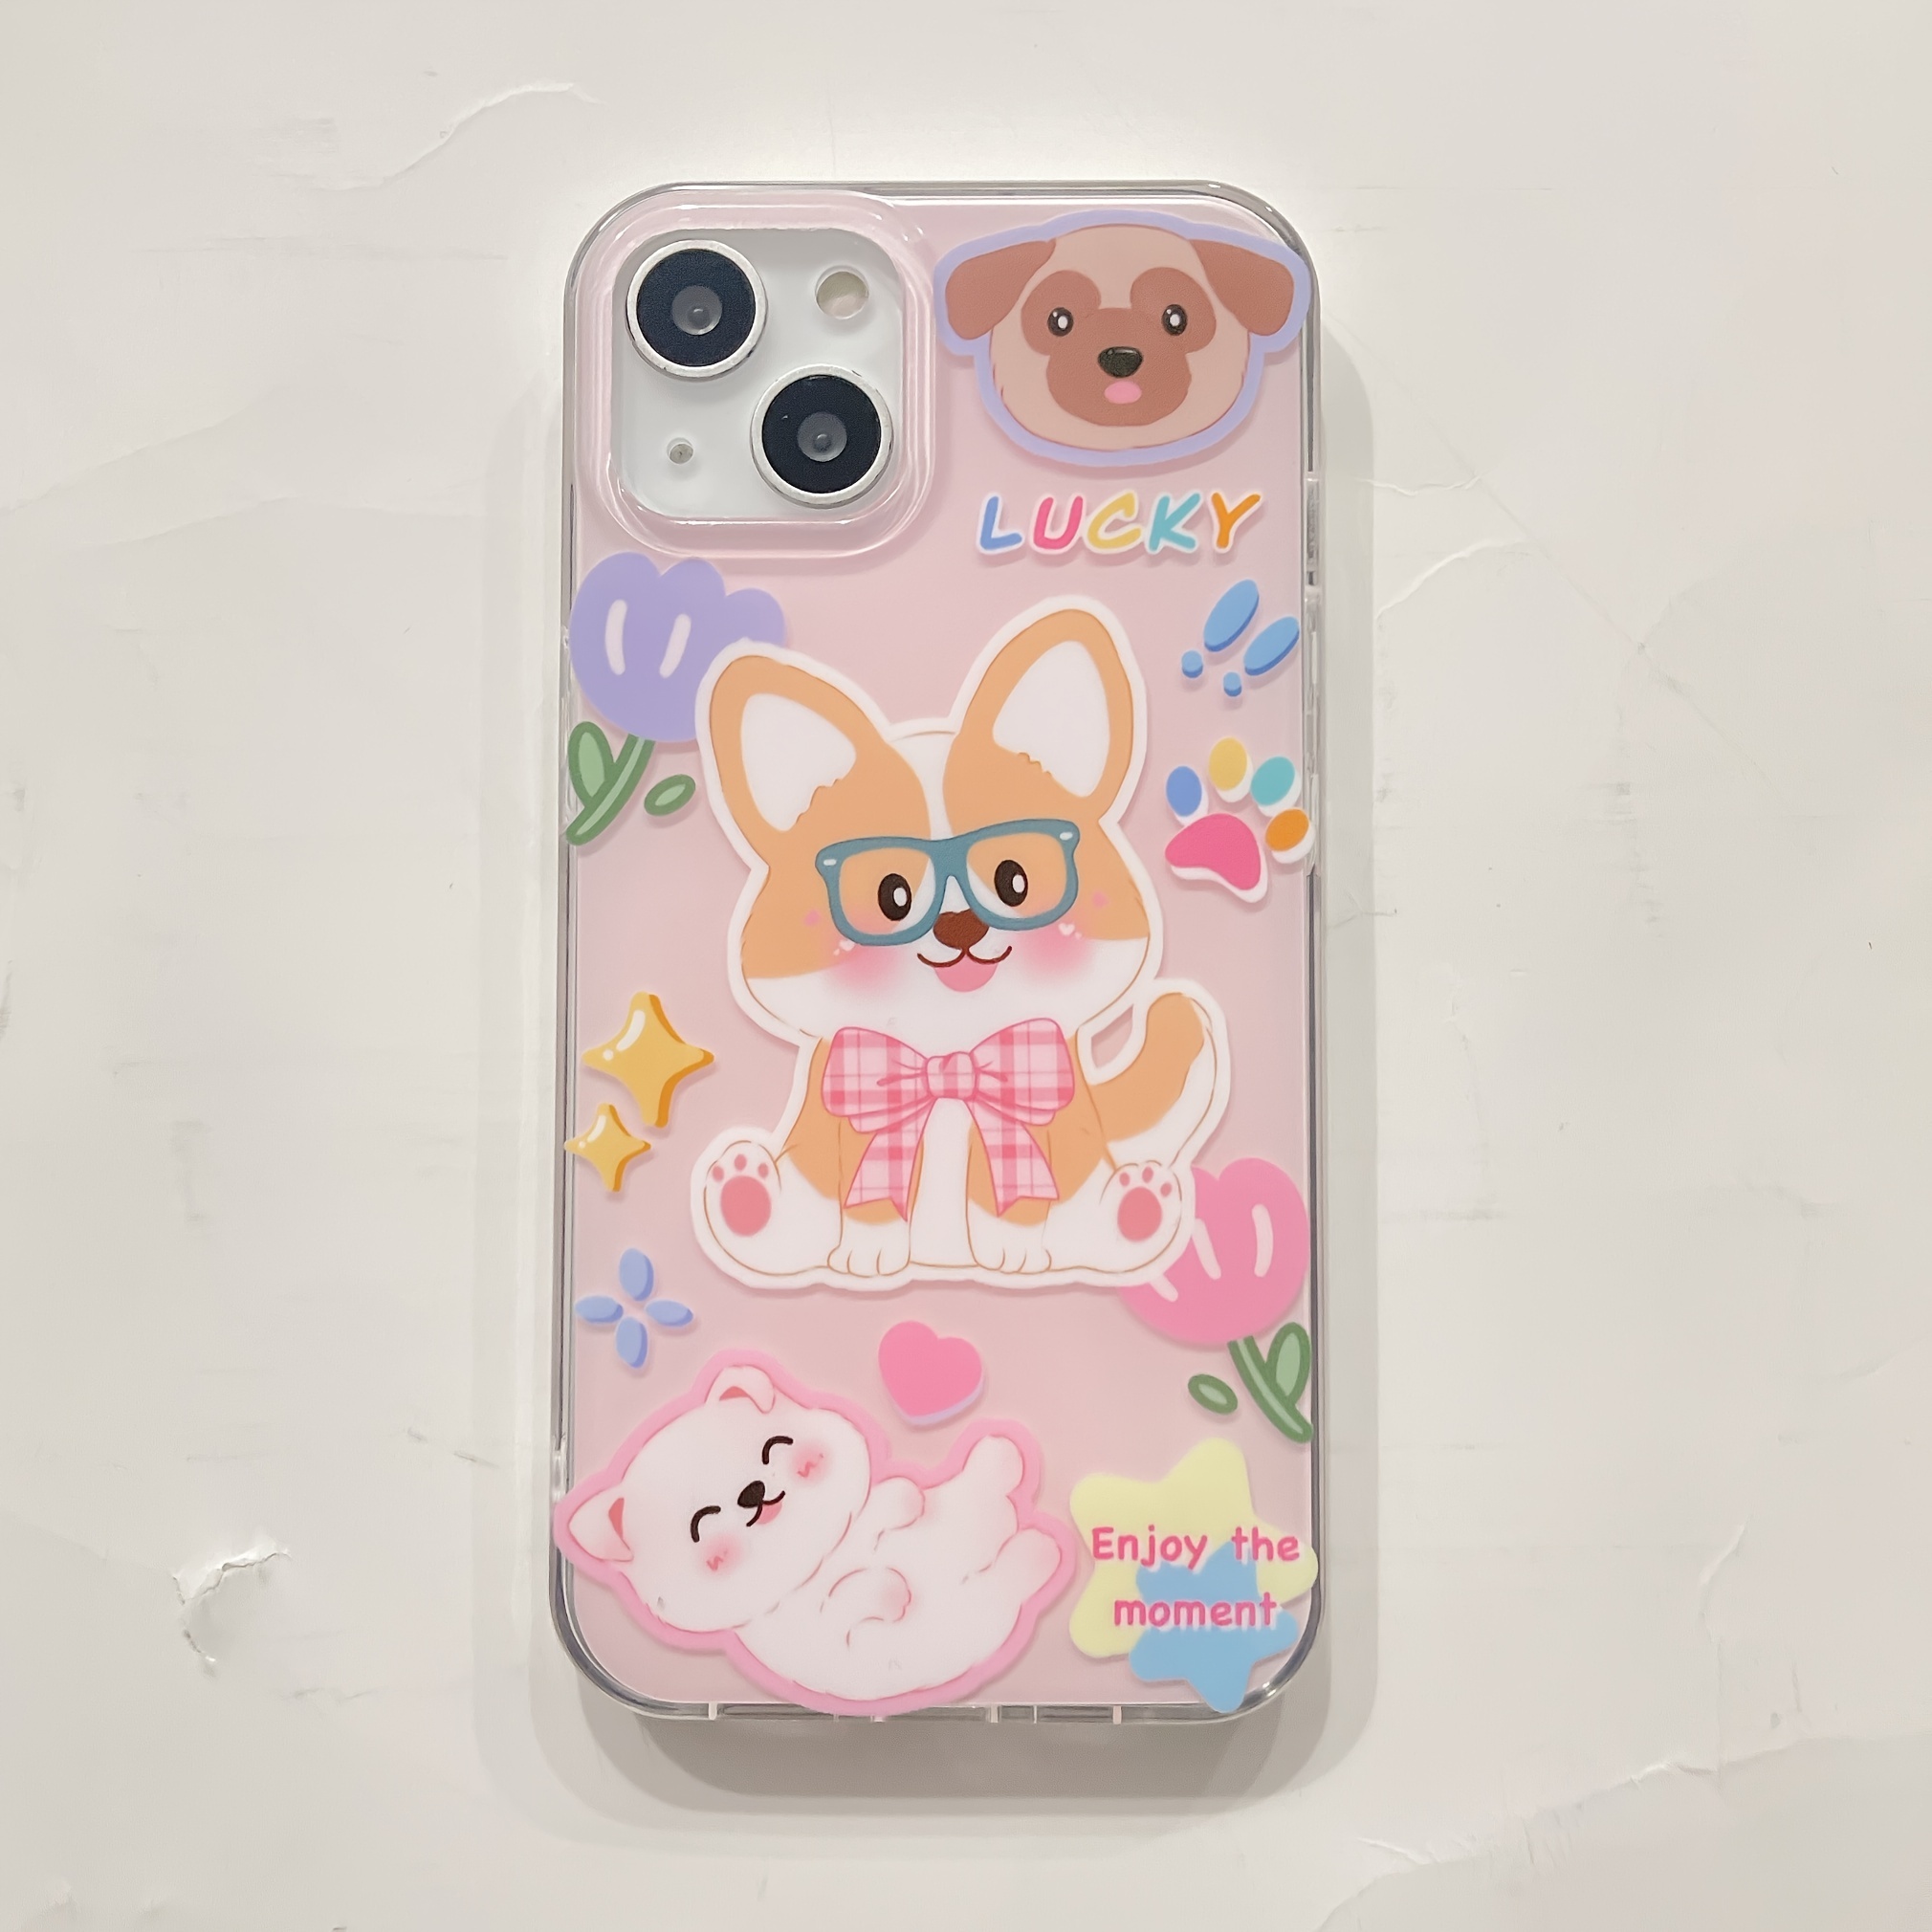 Jf2565 Cute Dog 001 ( Brand Puppy) English Title: Cuddly Dog Phone Case For Iphone  14 13 12 11 Xs Xr X 7 8 6s Mini Plus Pro Max Se,gift For Easter